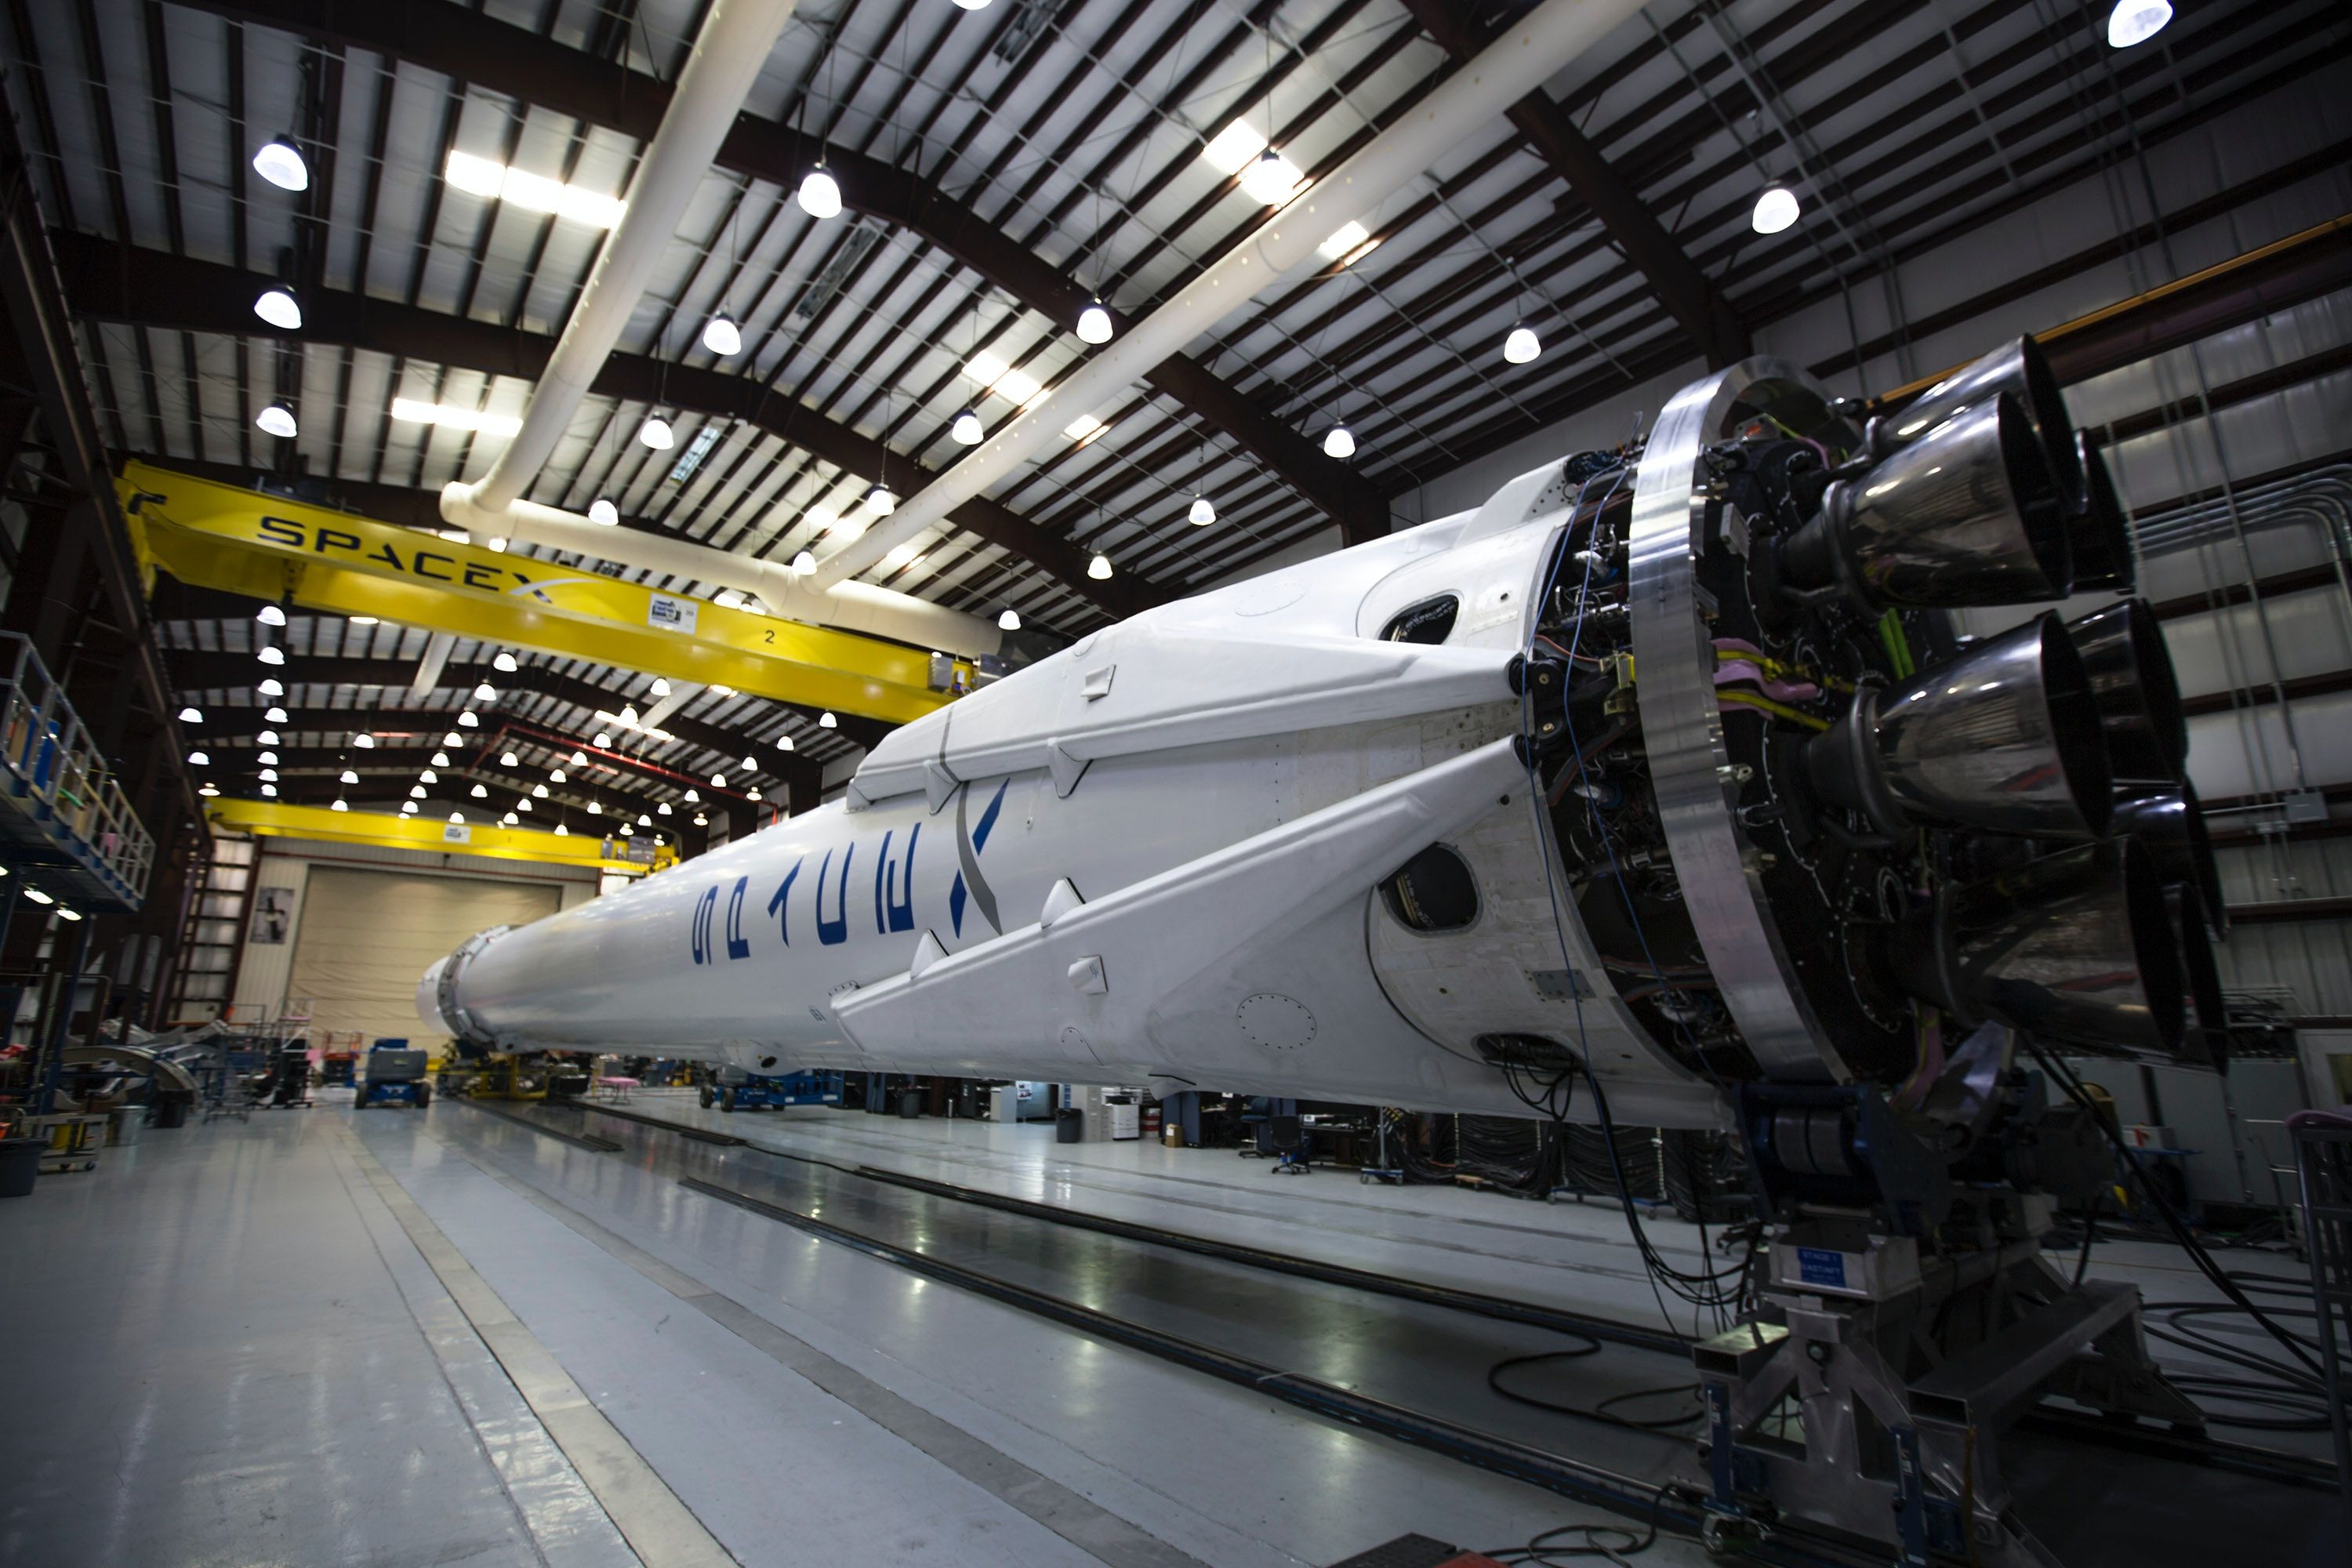 SpaceX rocket building facility